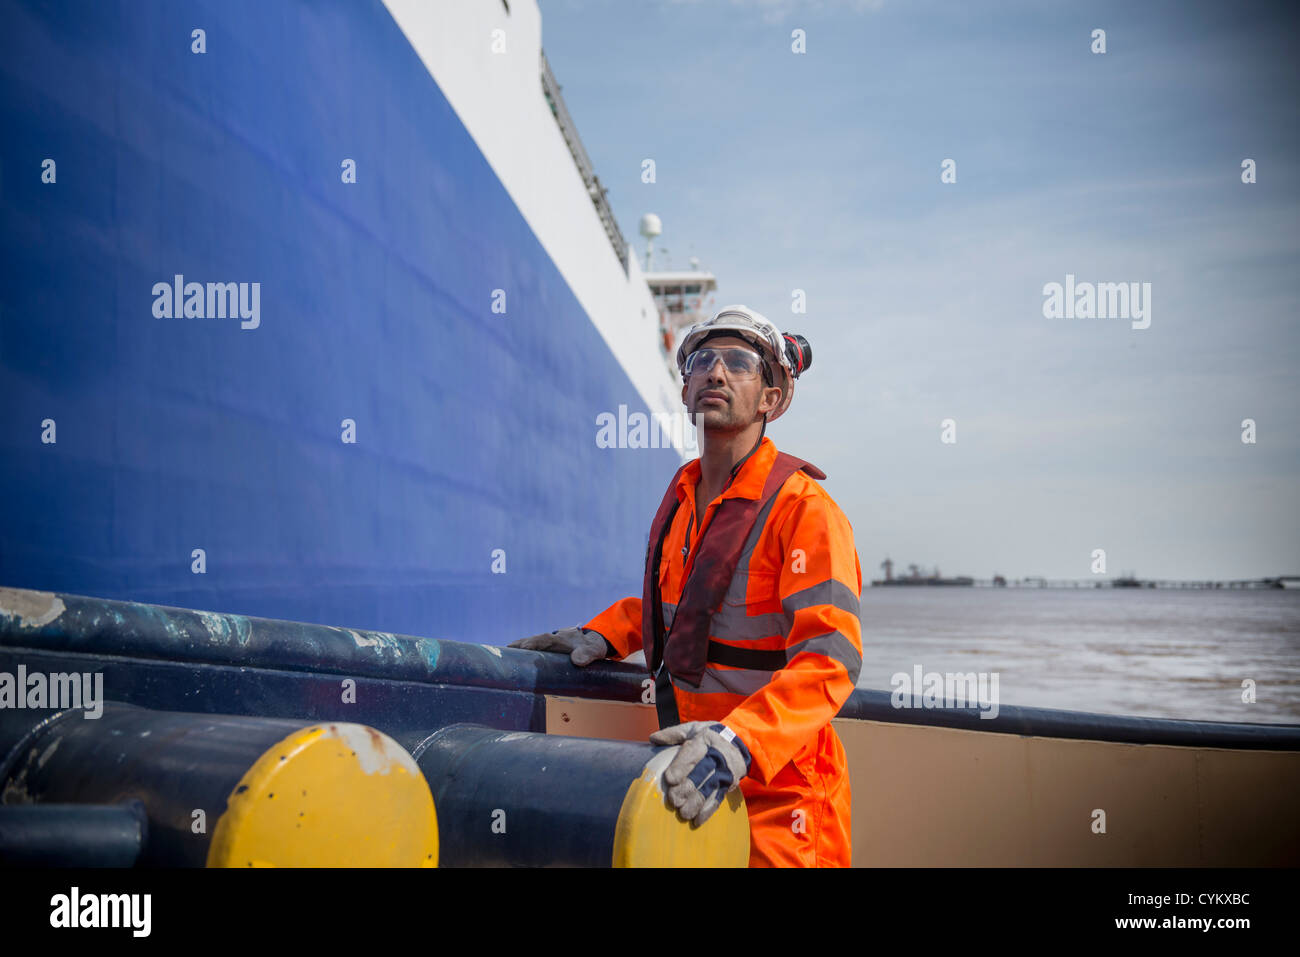 Worker standing on tug boat Stock Photo